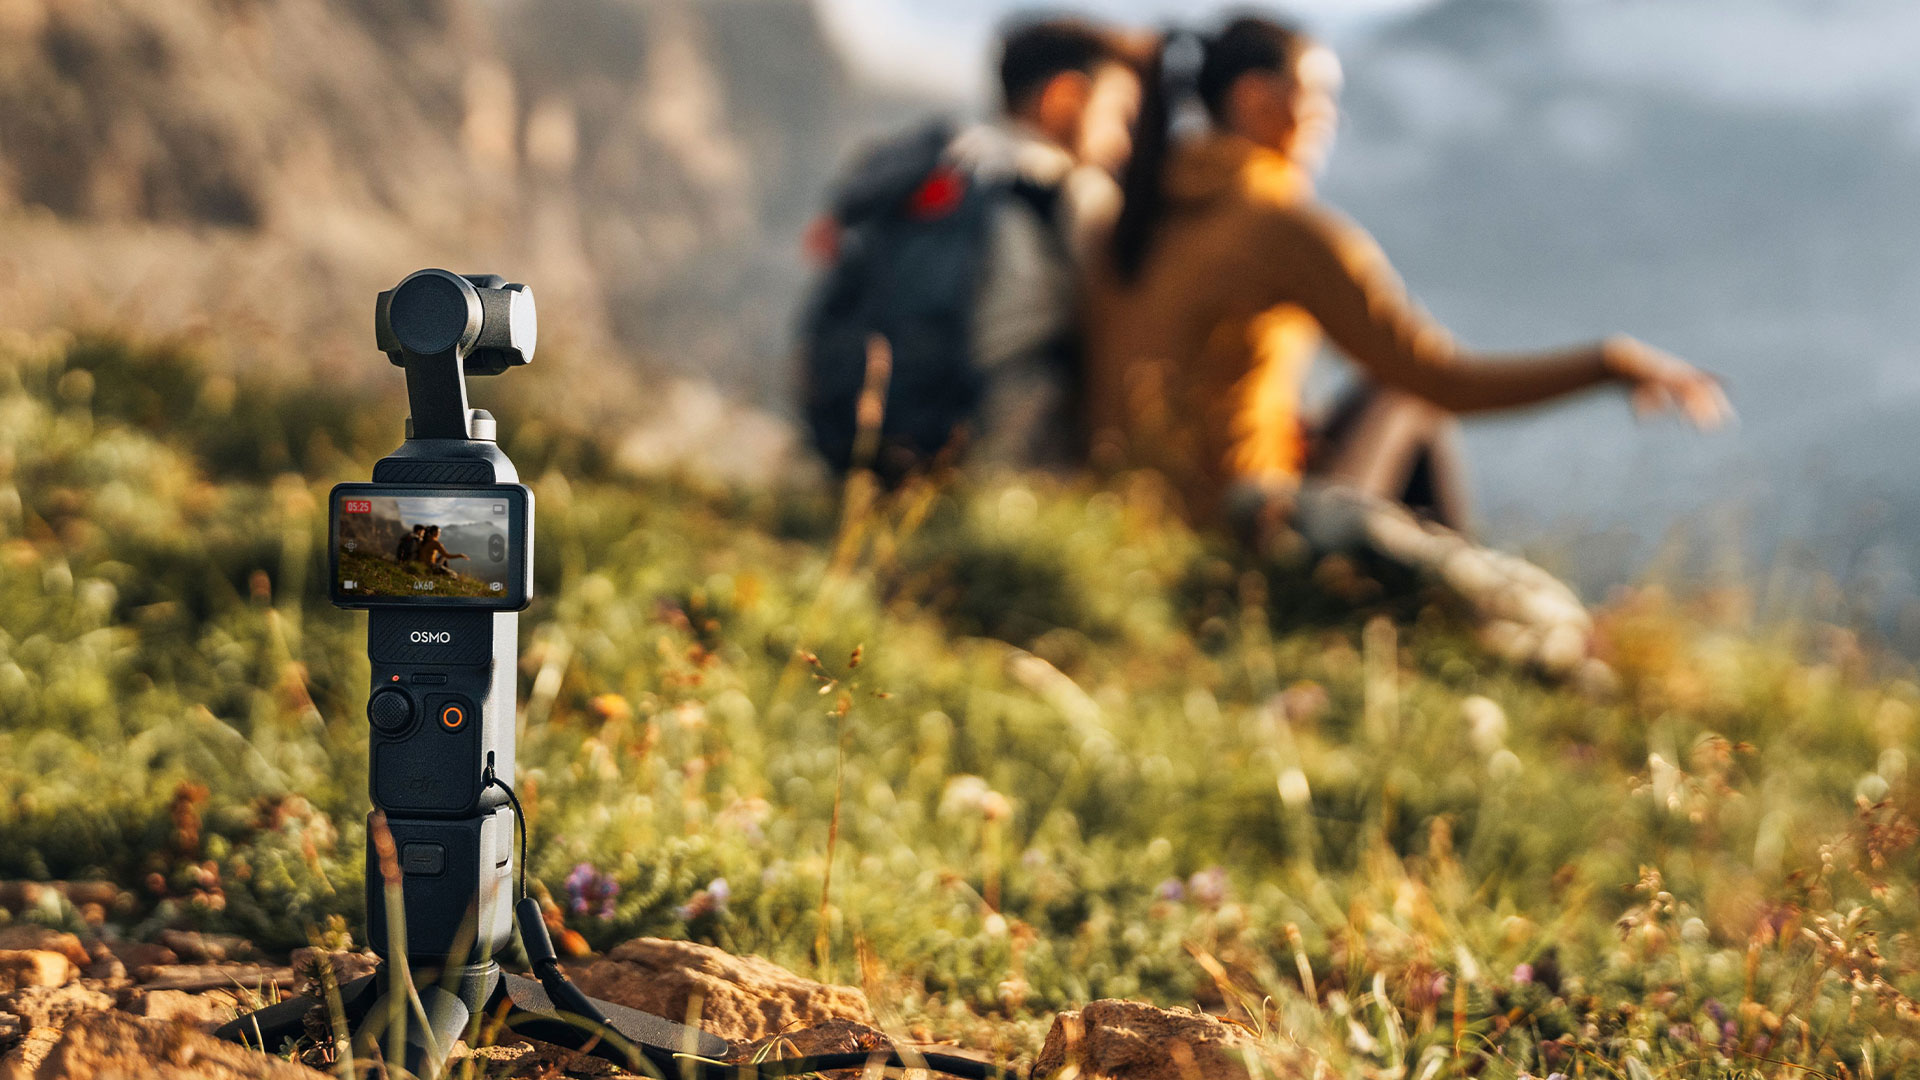 DJI Osmo Pocket 3 Released – Rotatable OLED Touchscreen, 1-inch Type  Sensor, 4K 120fps, 10-Bit, D-Log M, and More